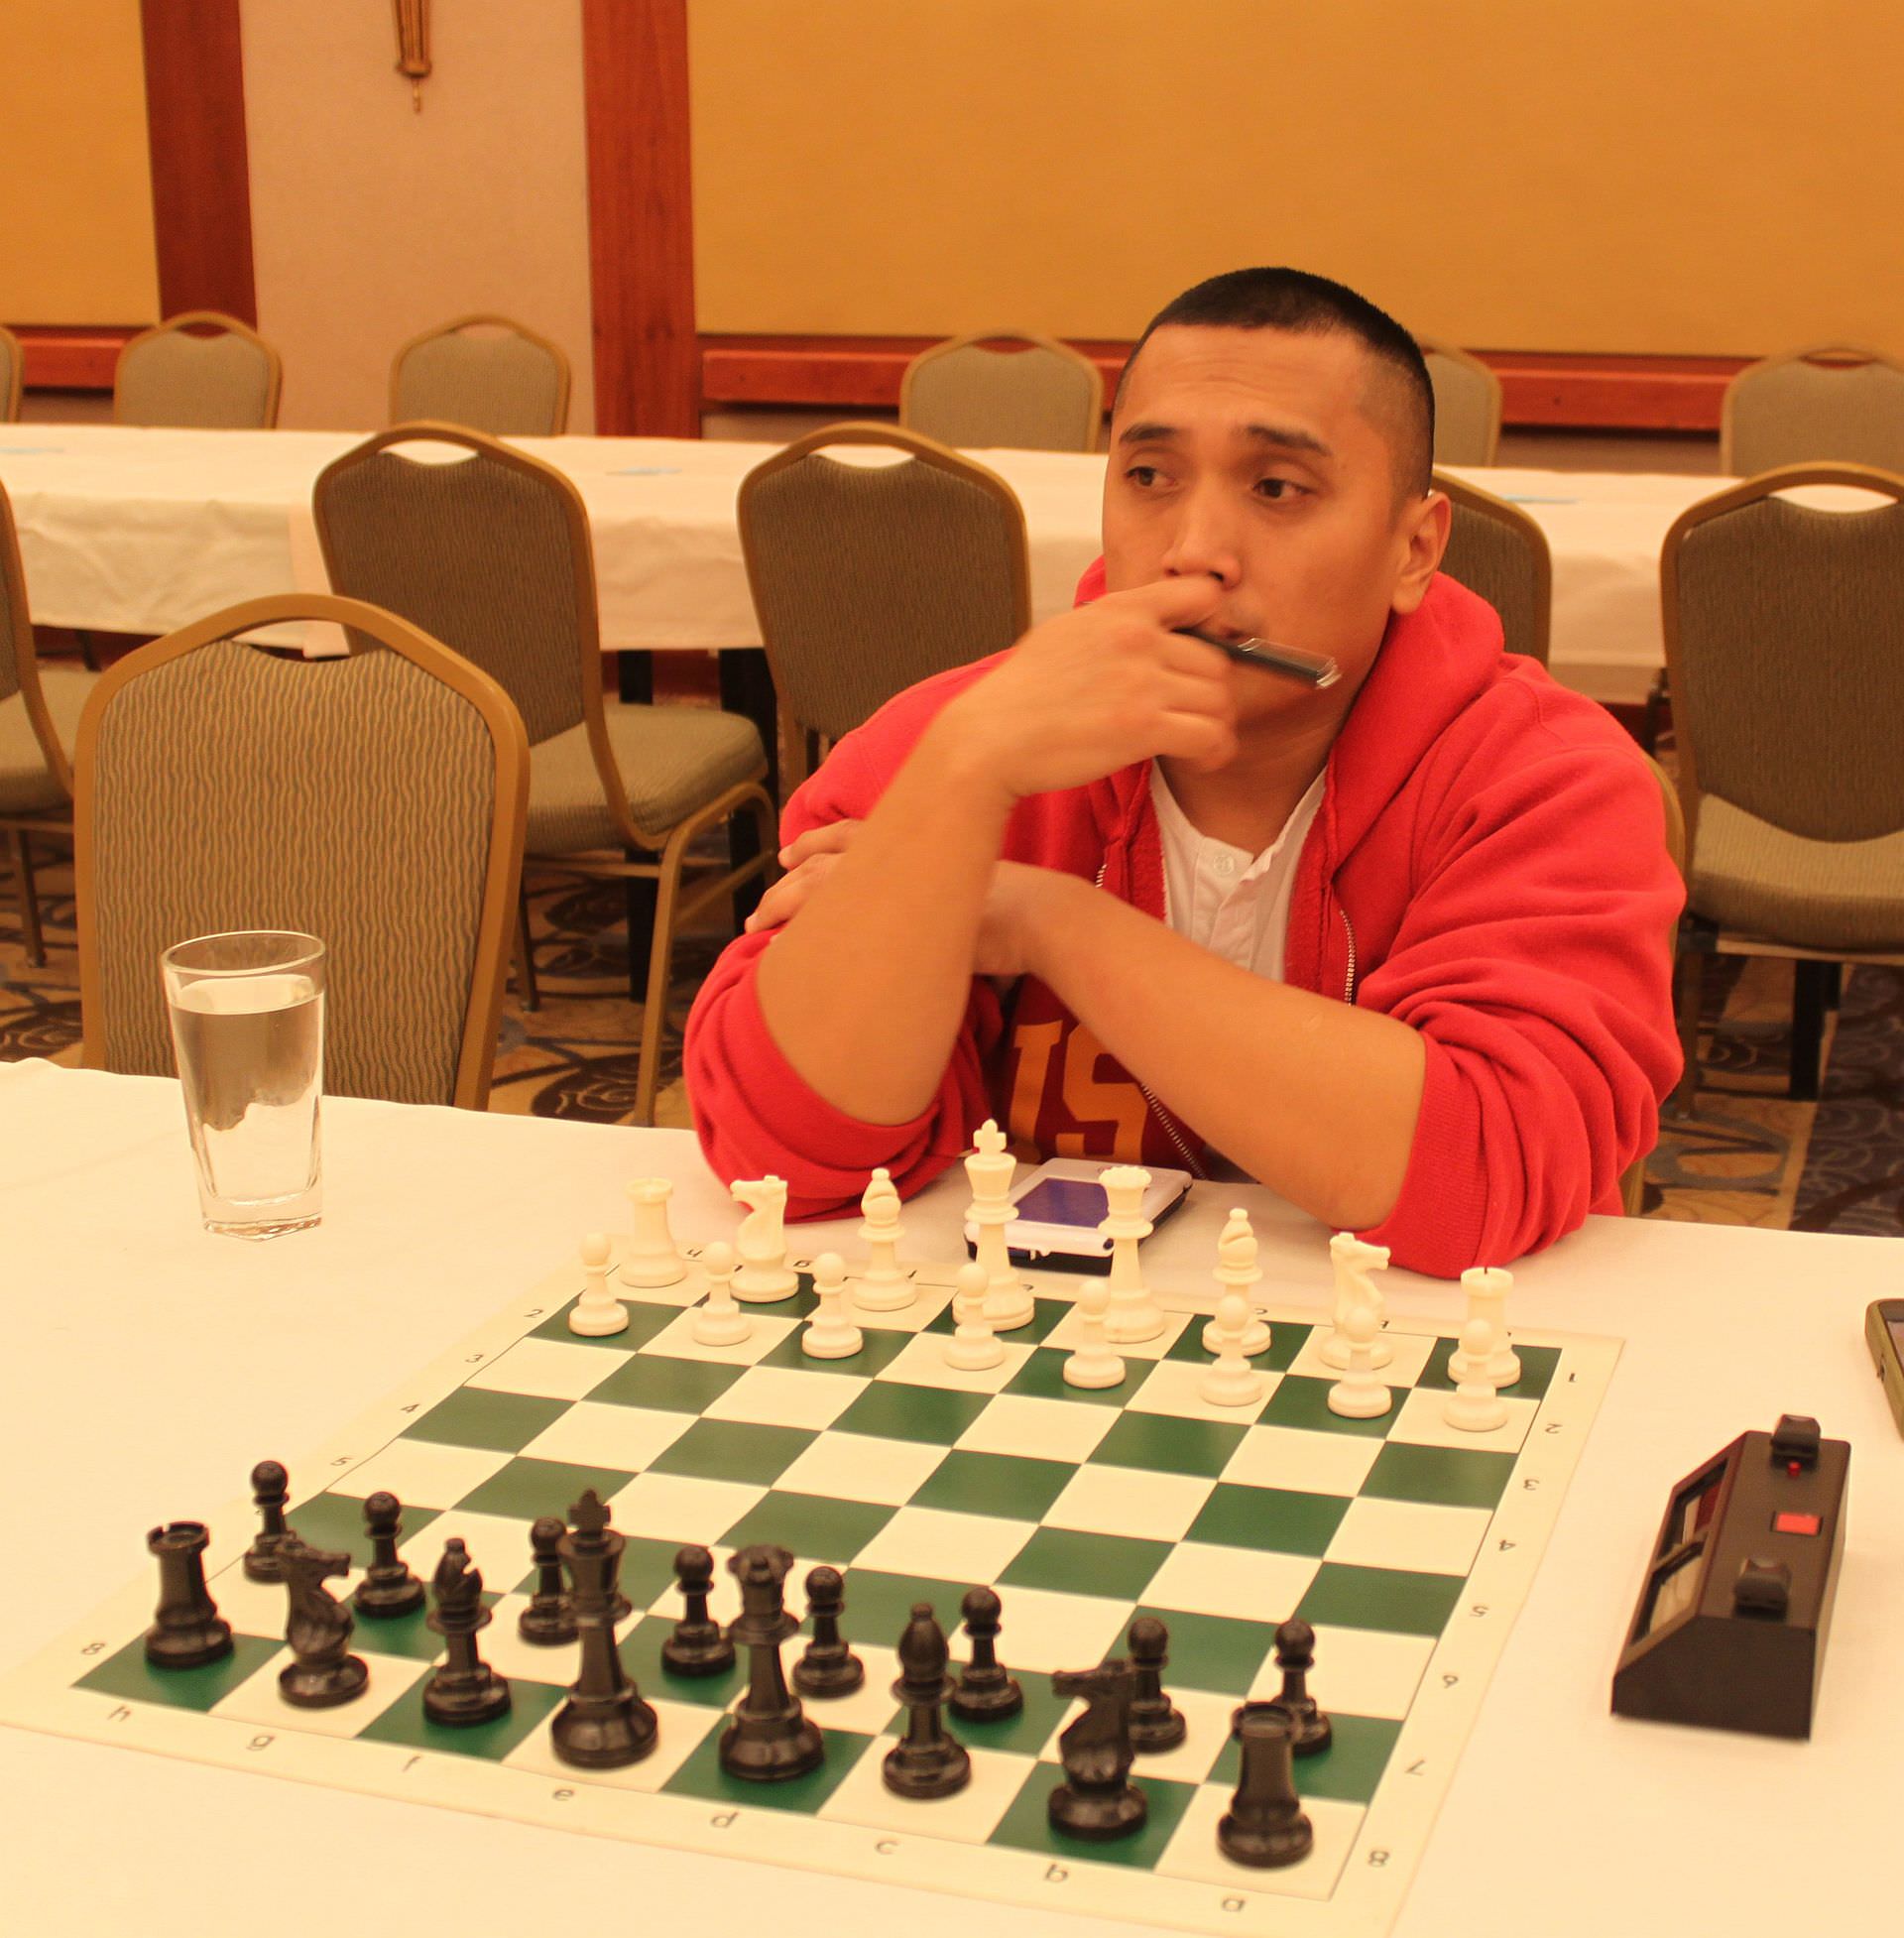 CCLA member Errol Acosta photographed at the chess board